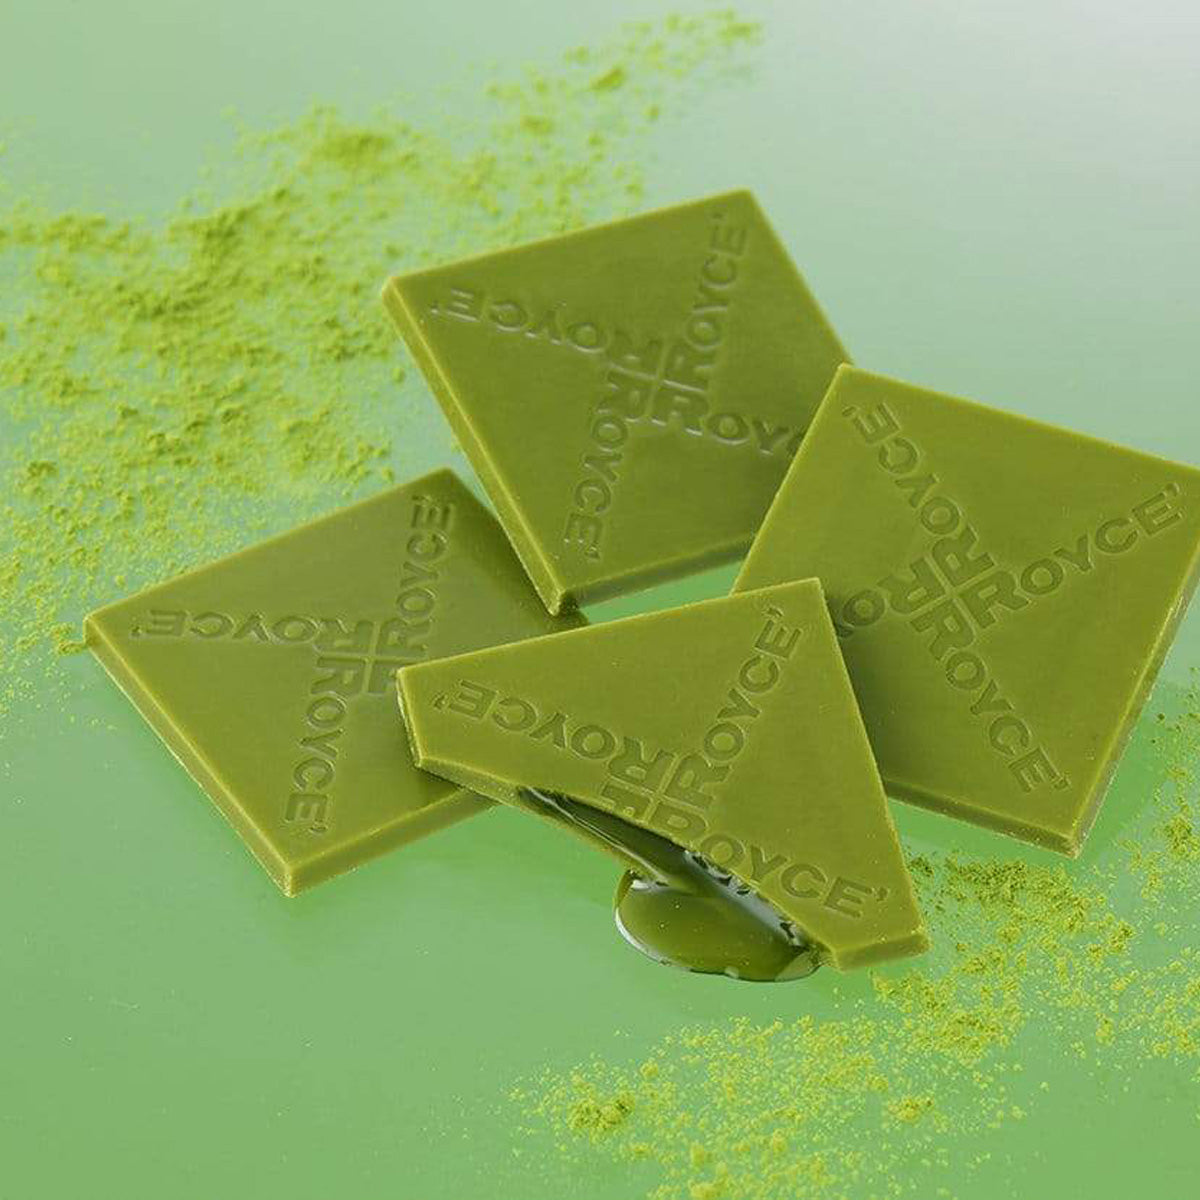 ROYCE' Chocolate - Prafeuille Chocolat "Matcha" - Image shows green chocolate squares filled with green sauce and engraved with the words "ROYCE'". Accents include green tea powder scattered. Background is in green color.